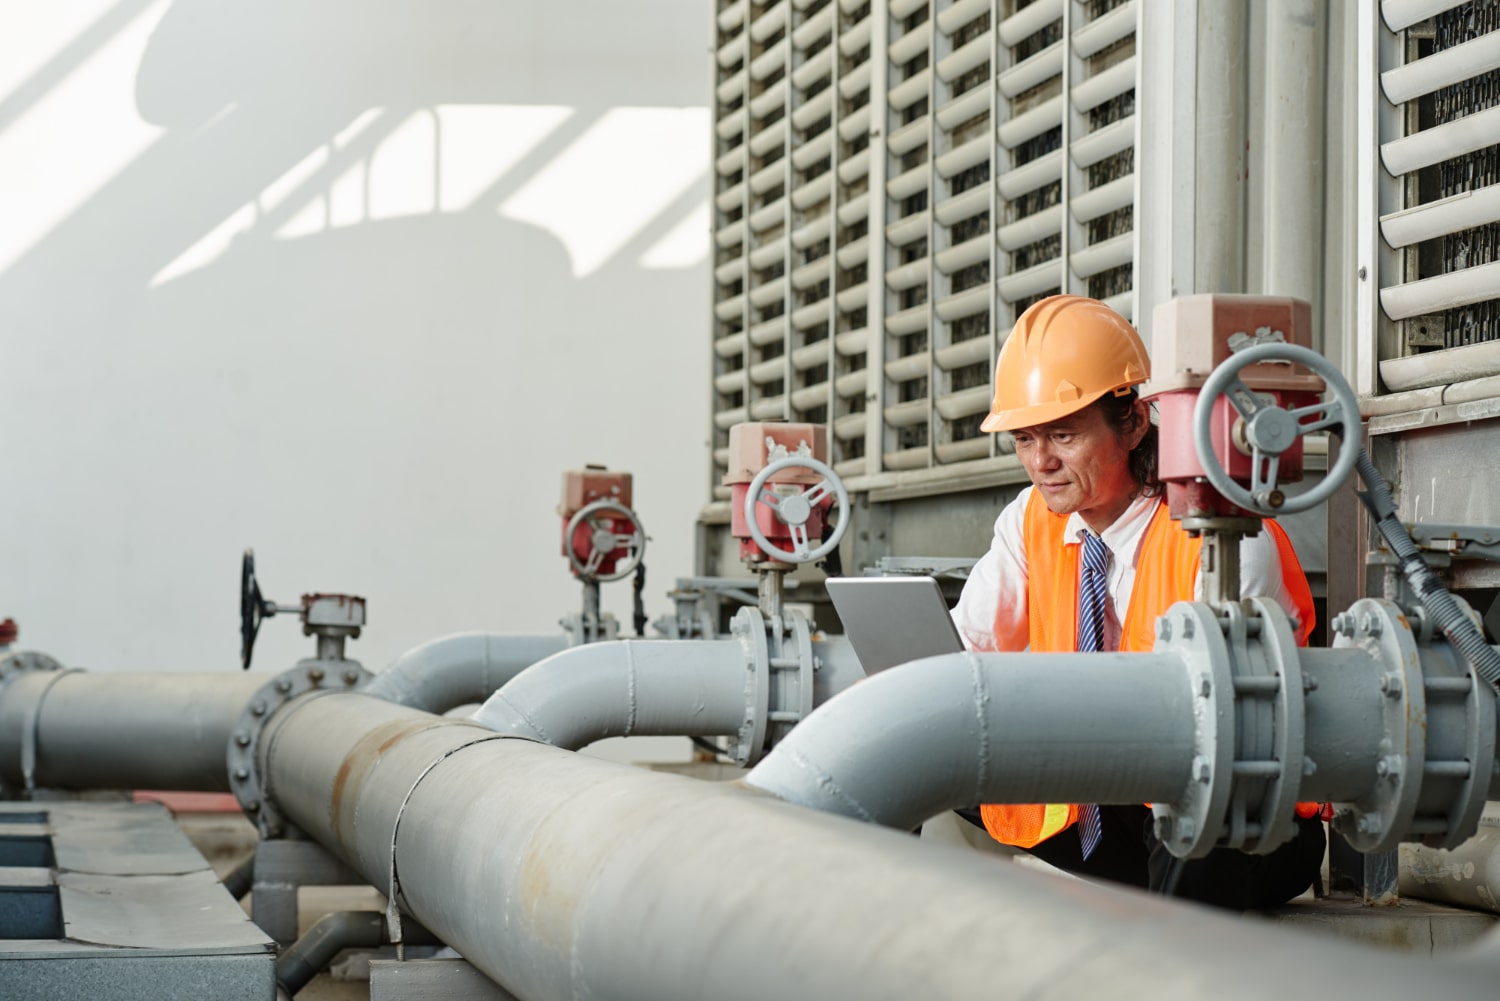 Water and Energy Services through Cloud Solutions